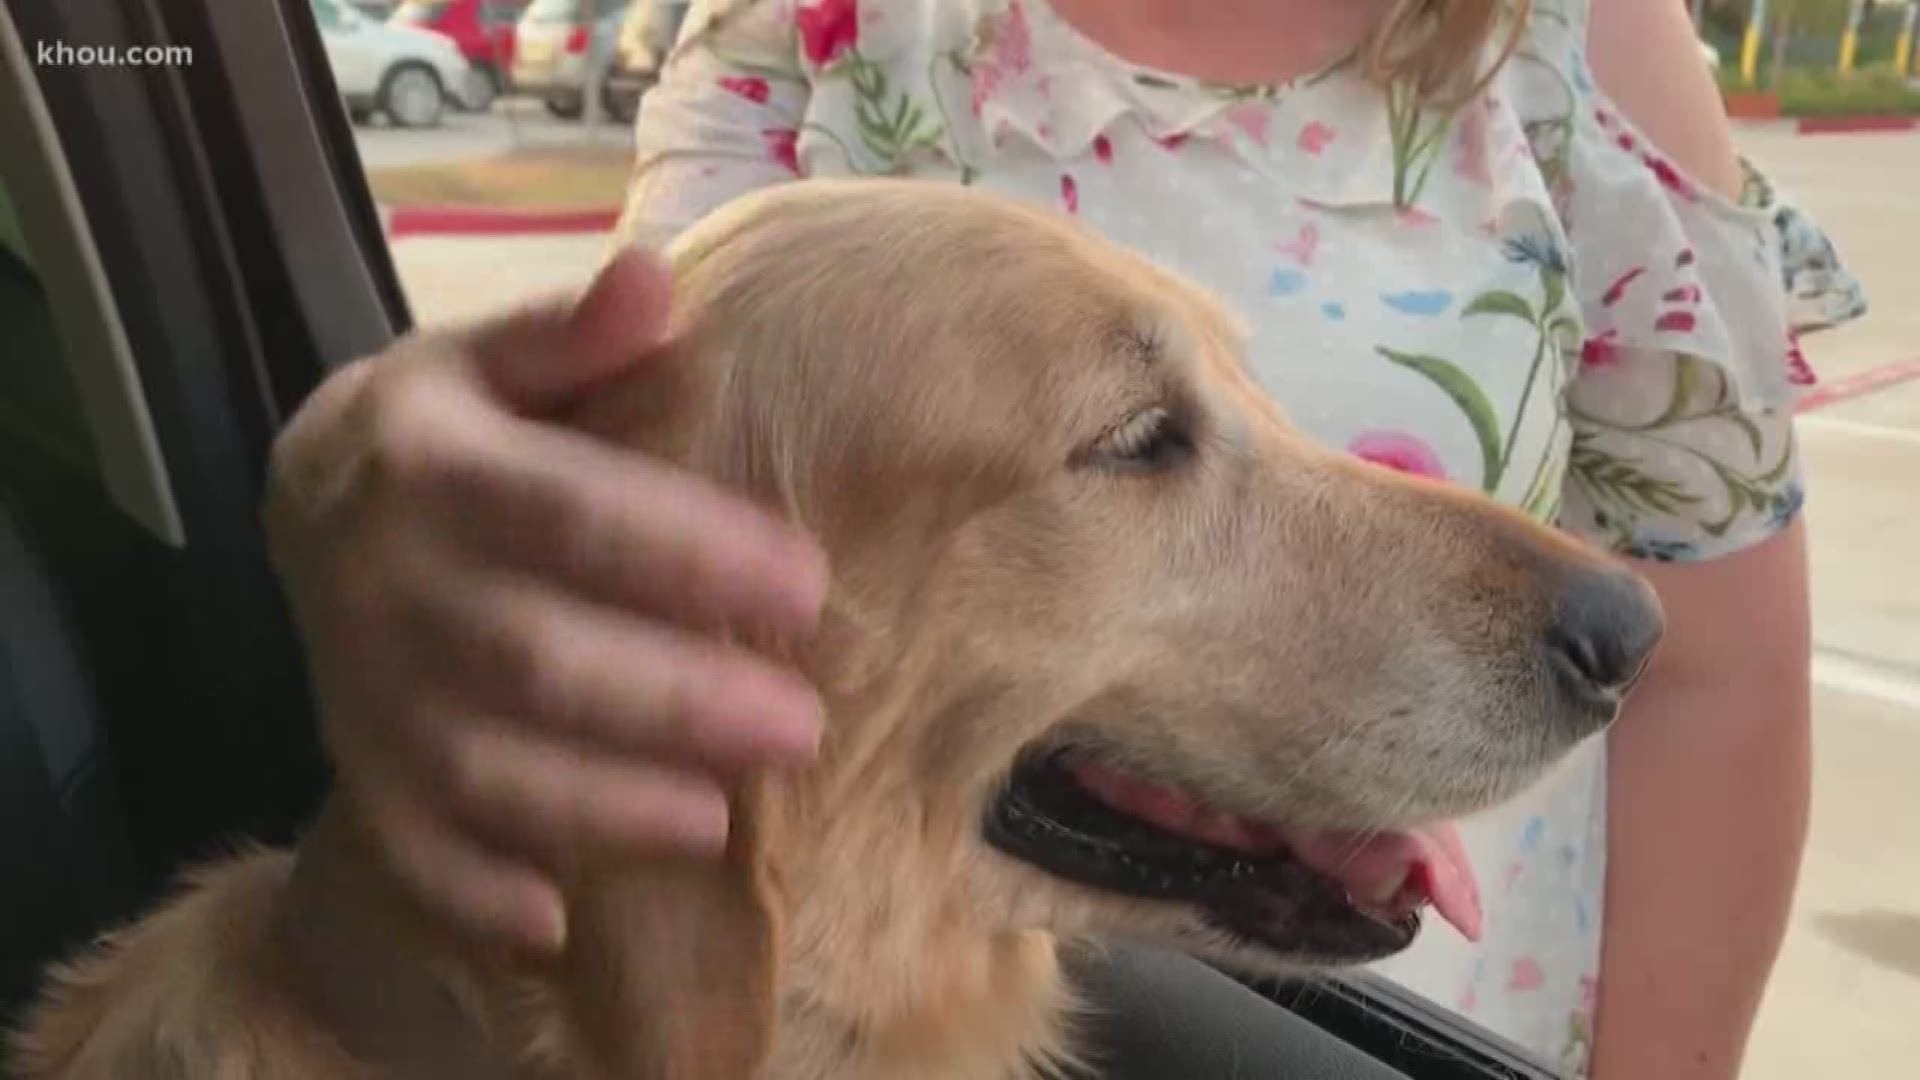 A family passing through the Houston area said their golden retriever Lucy was stolen from a restaurant parking lot over the weekend.